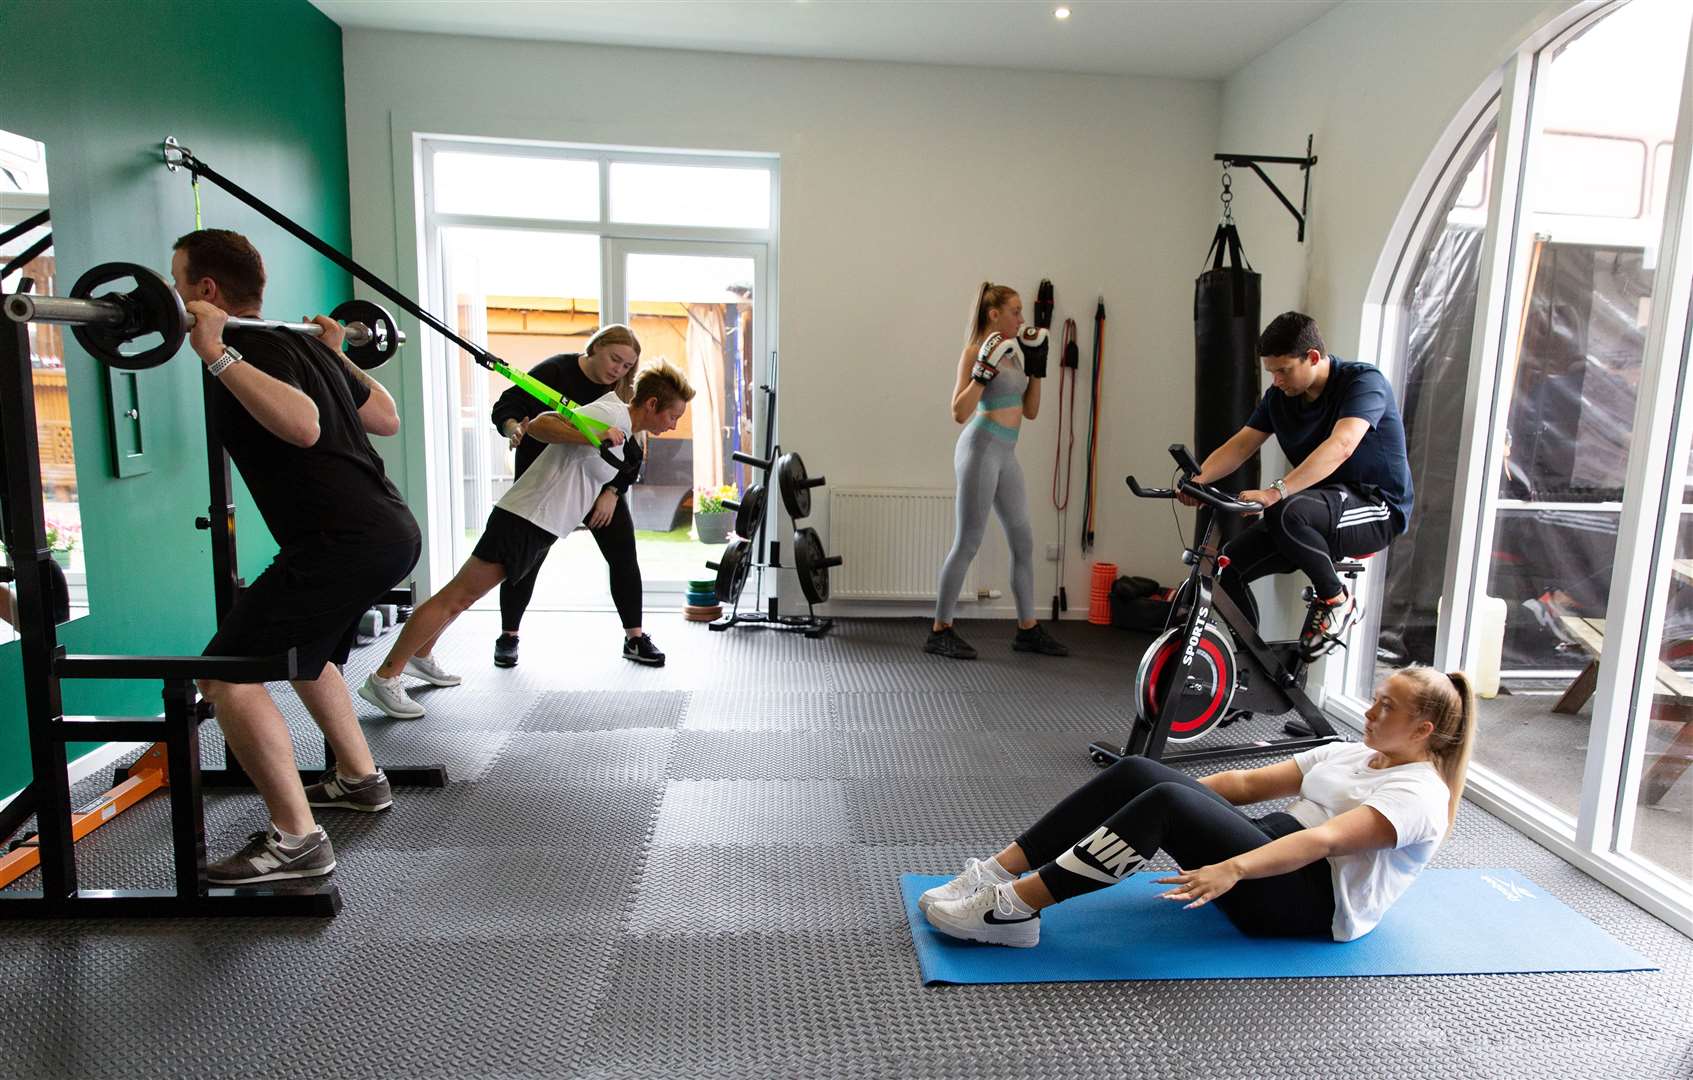 Platform 1 Hair and Beauty Spa has collaborated with Body and Breathe to provide a fully equipped fitness suite.